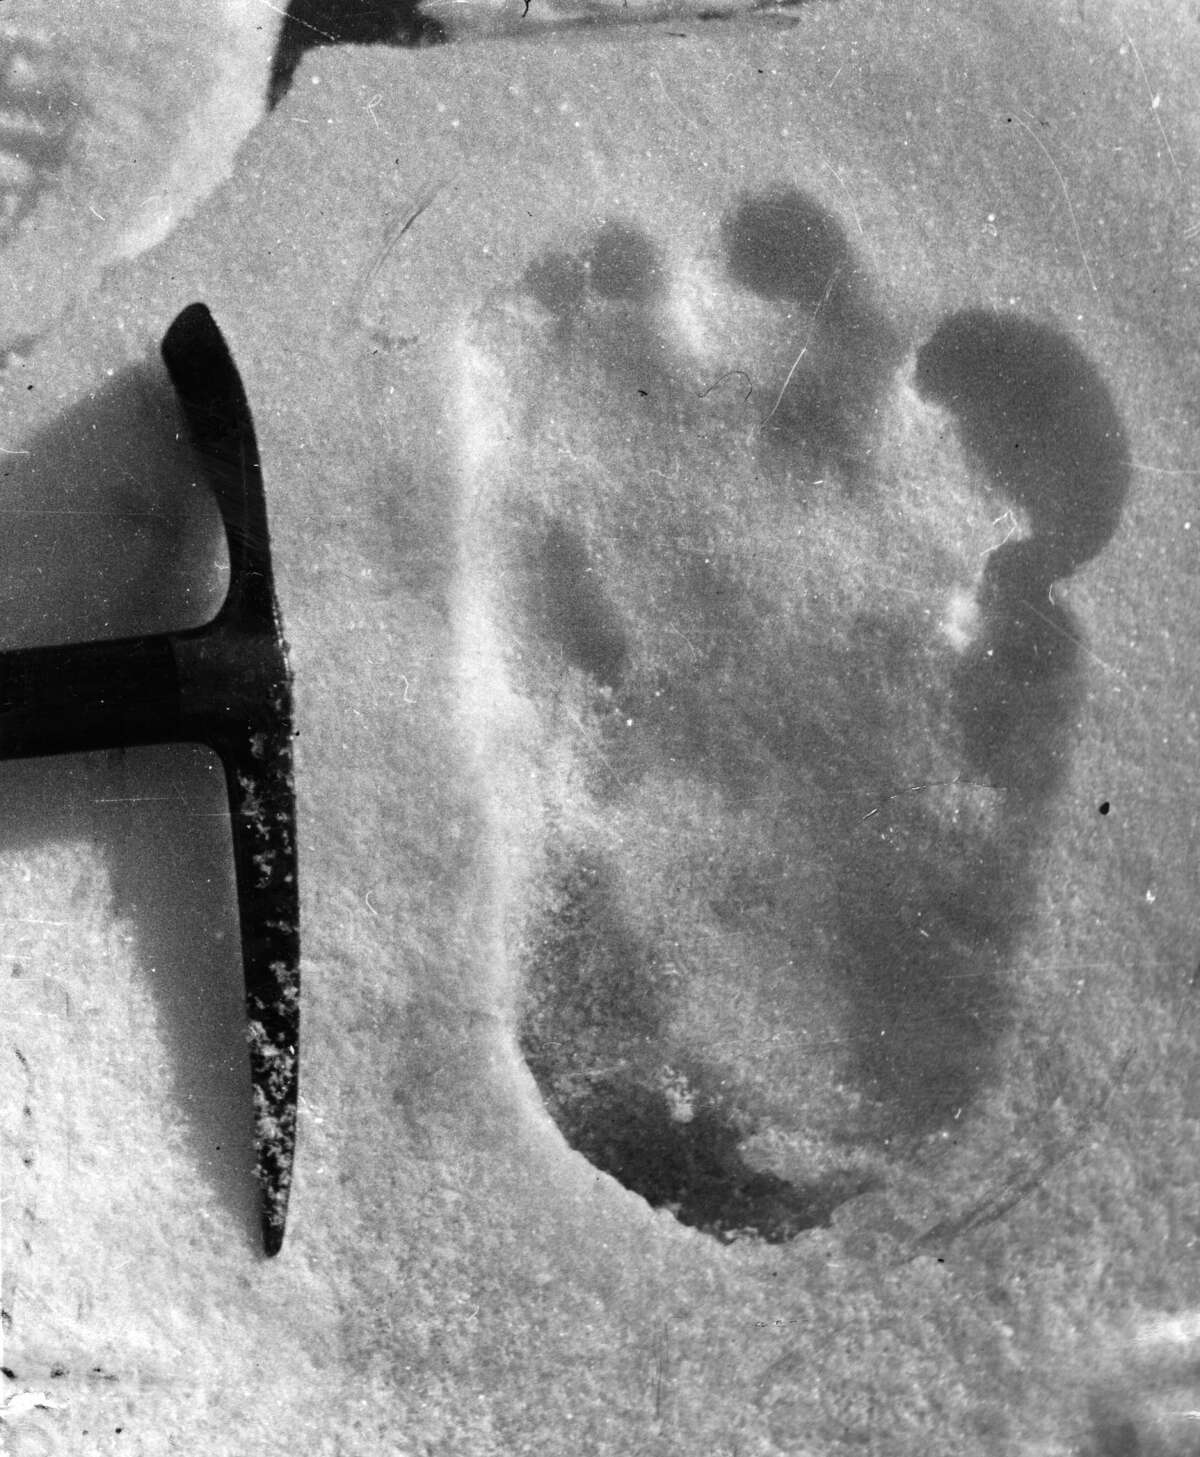 13th December 1951: The footprint of the Abominable Snowman, taken near Mount Everest. (Photo by Topical Press Agency/Getty Images)